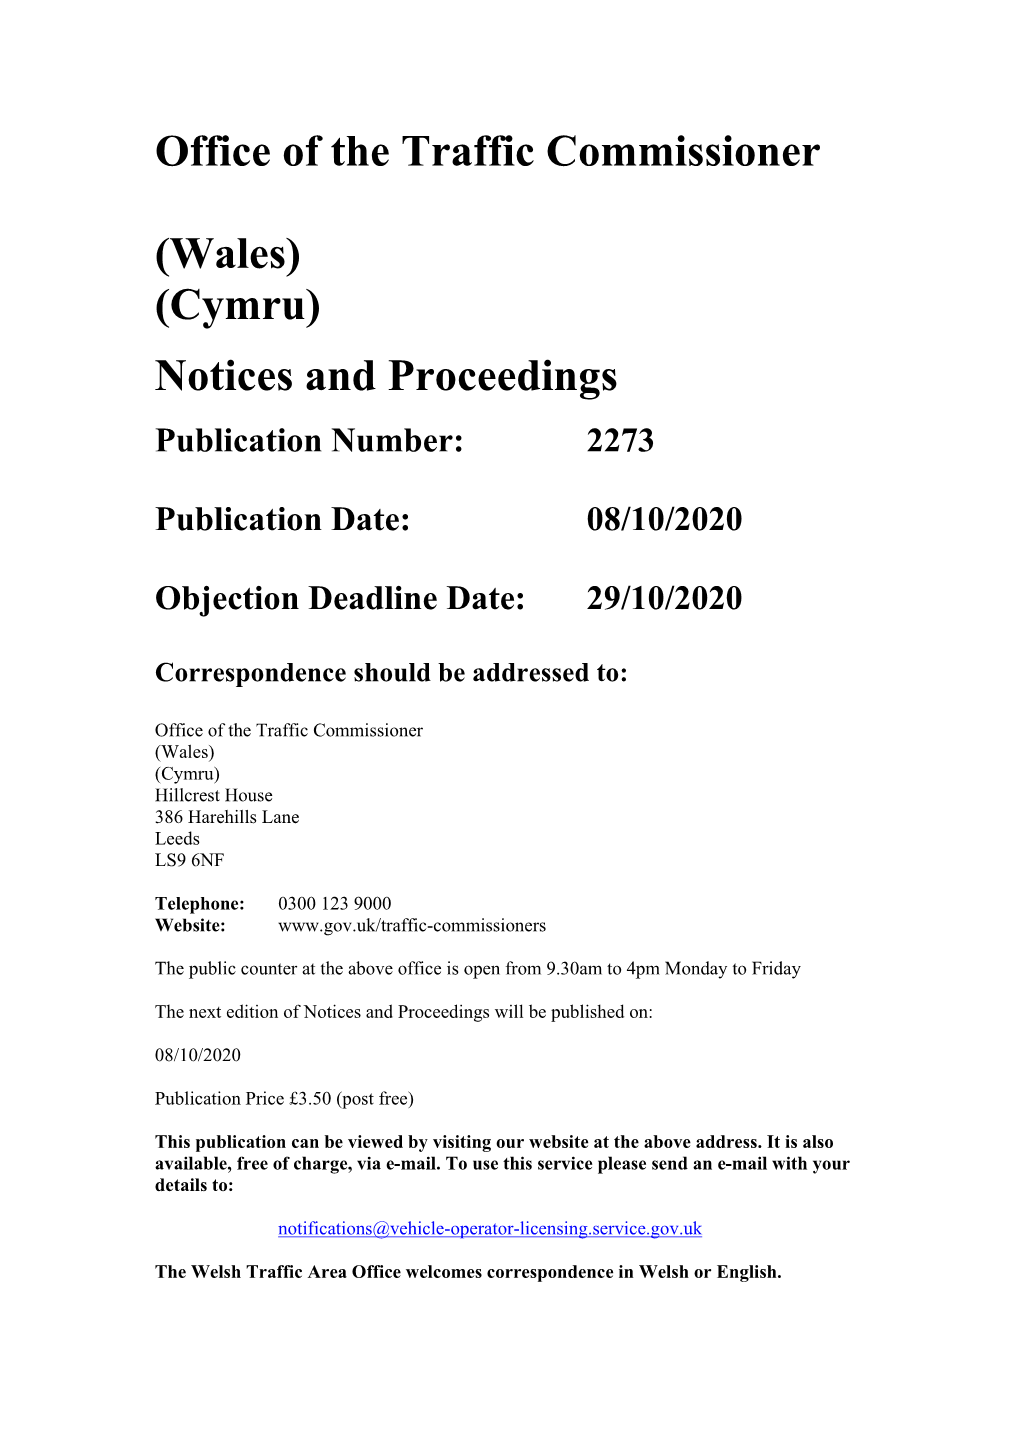 Notices and Proceedings for Wales 2273